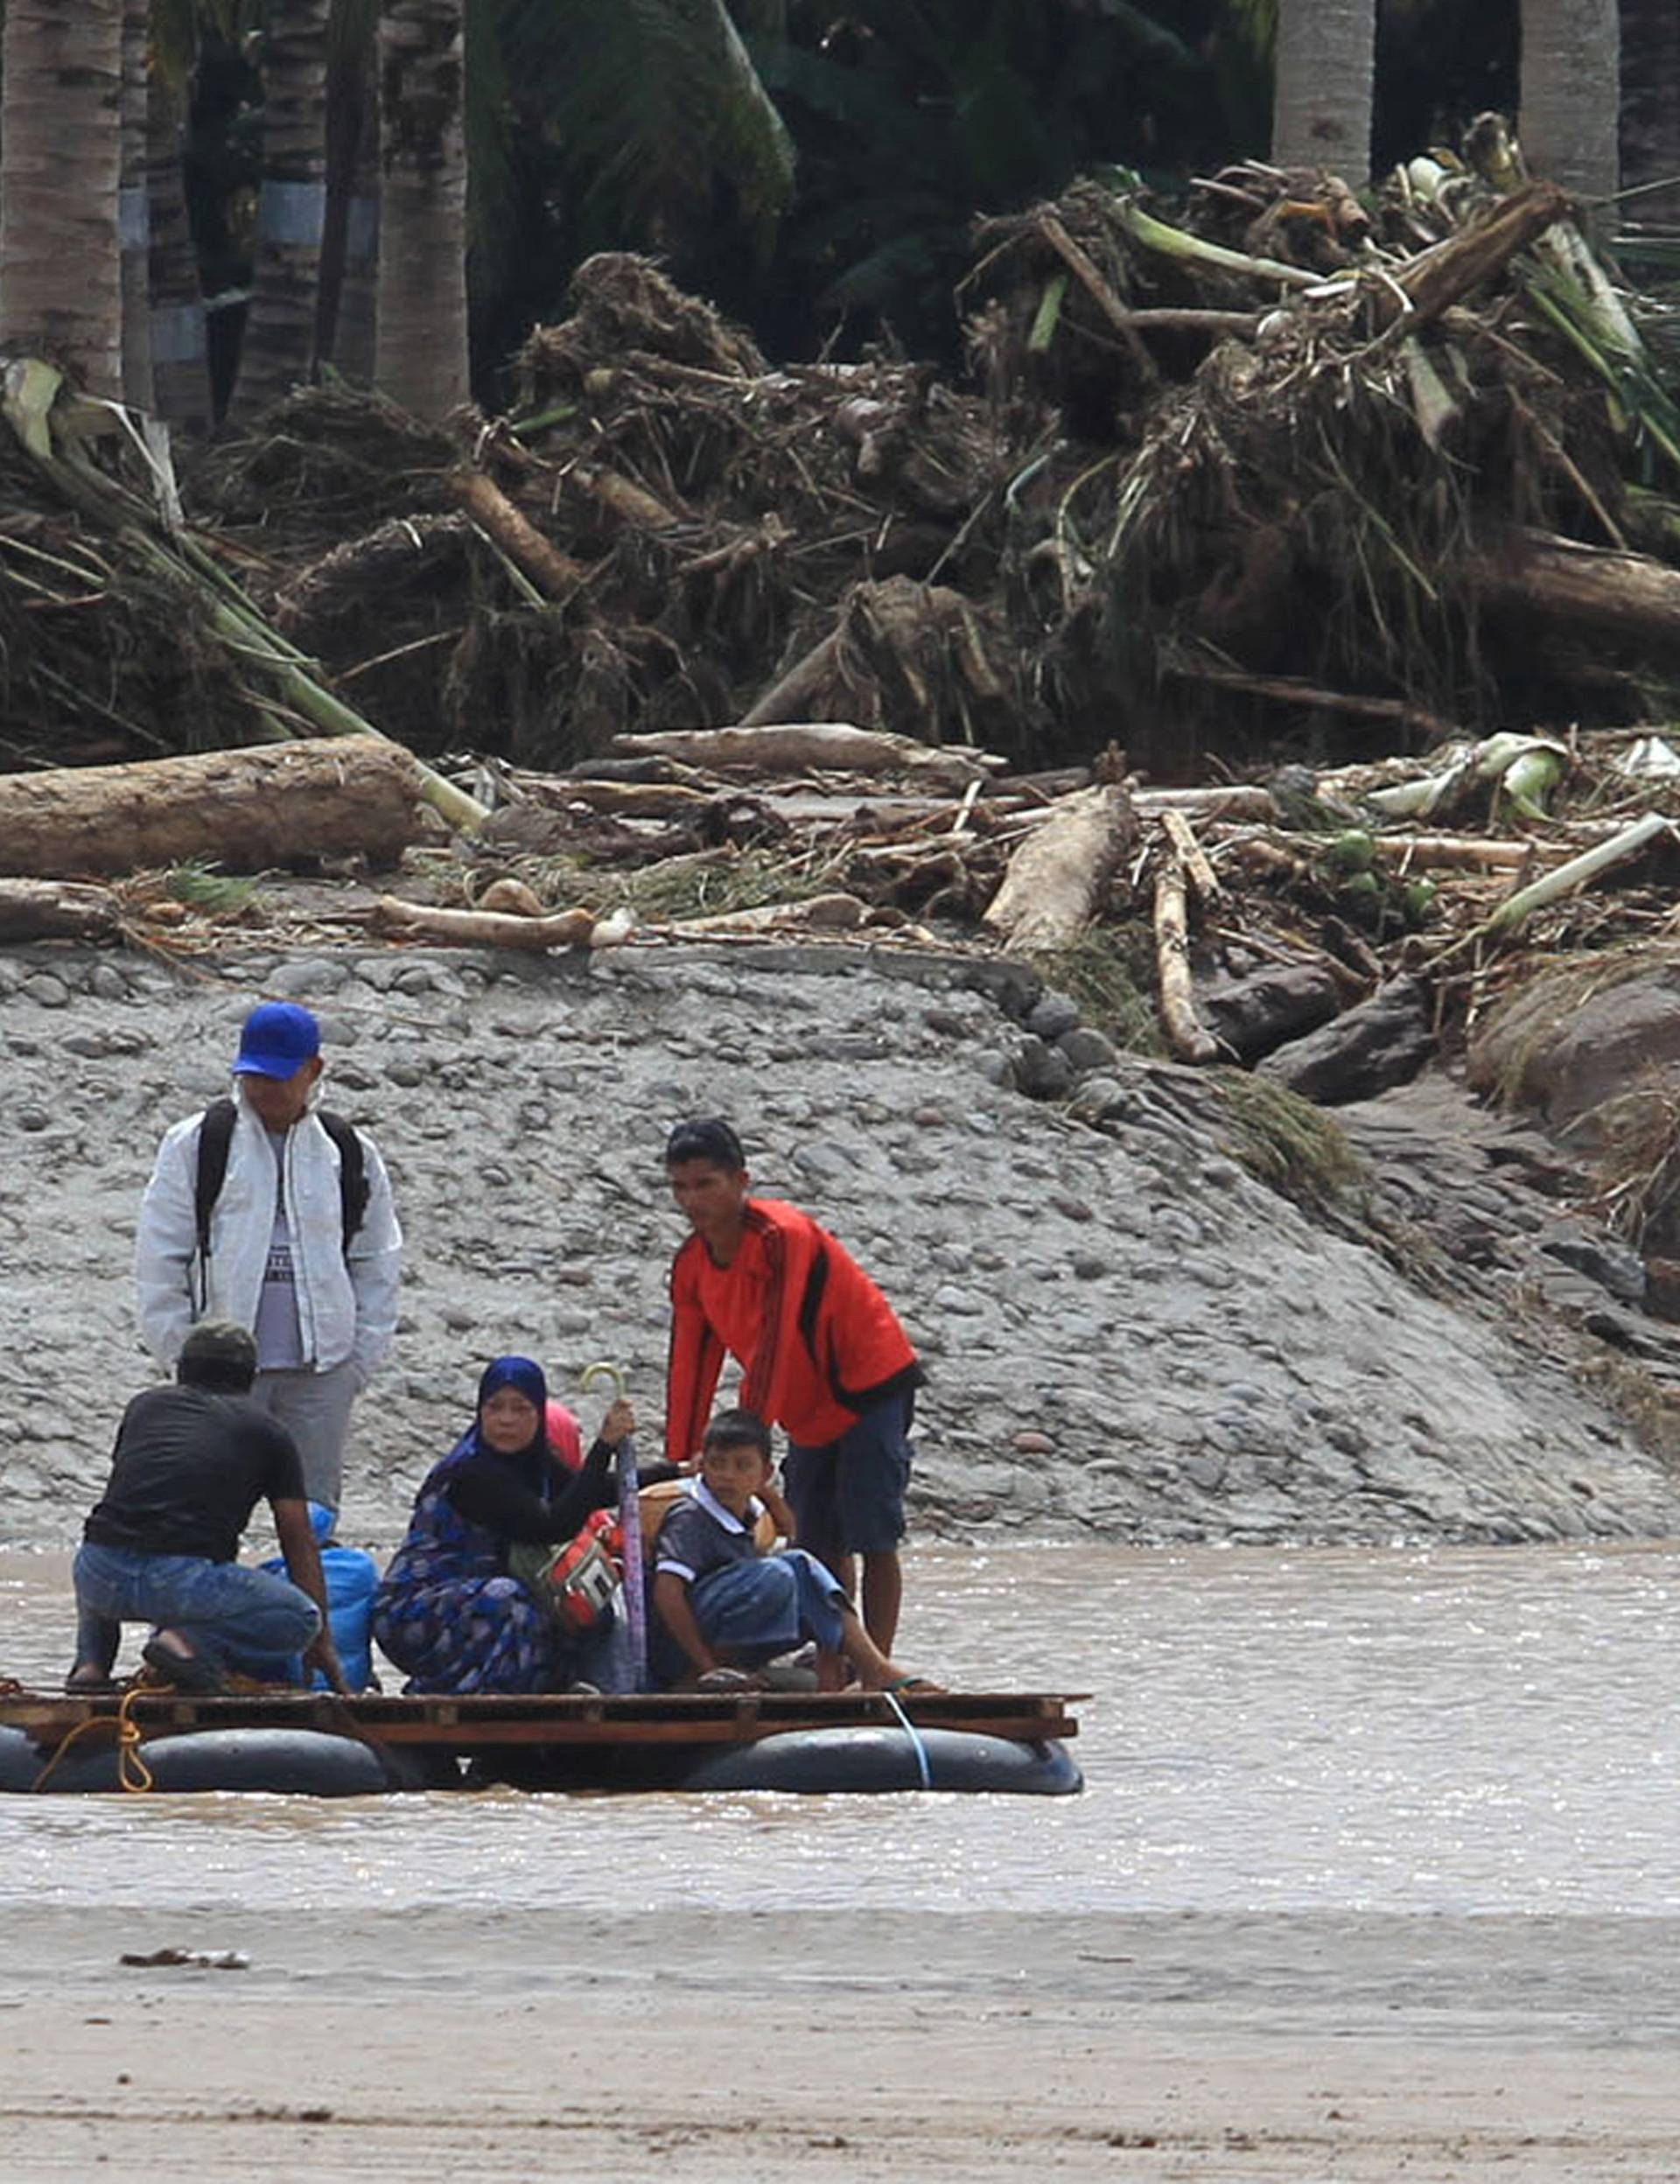 Residents are transported on makeshift raft after bridge was destroyed during flash floods in Salvador, Lanao del Norte